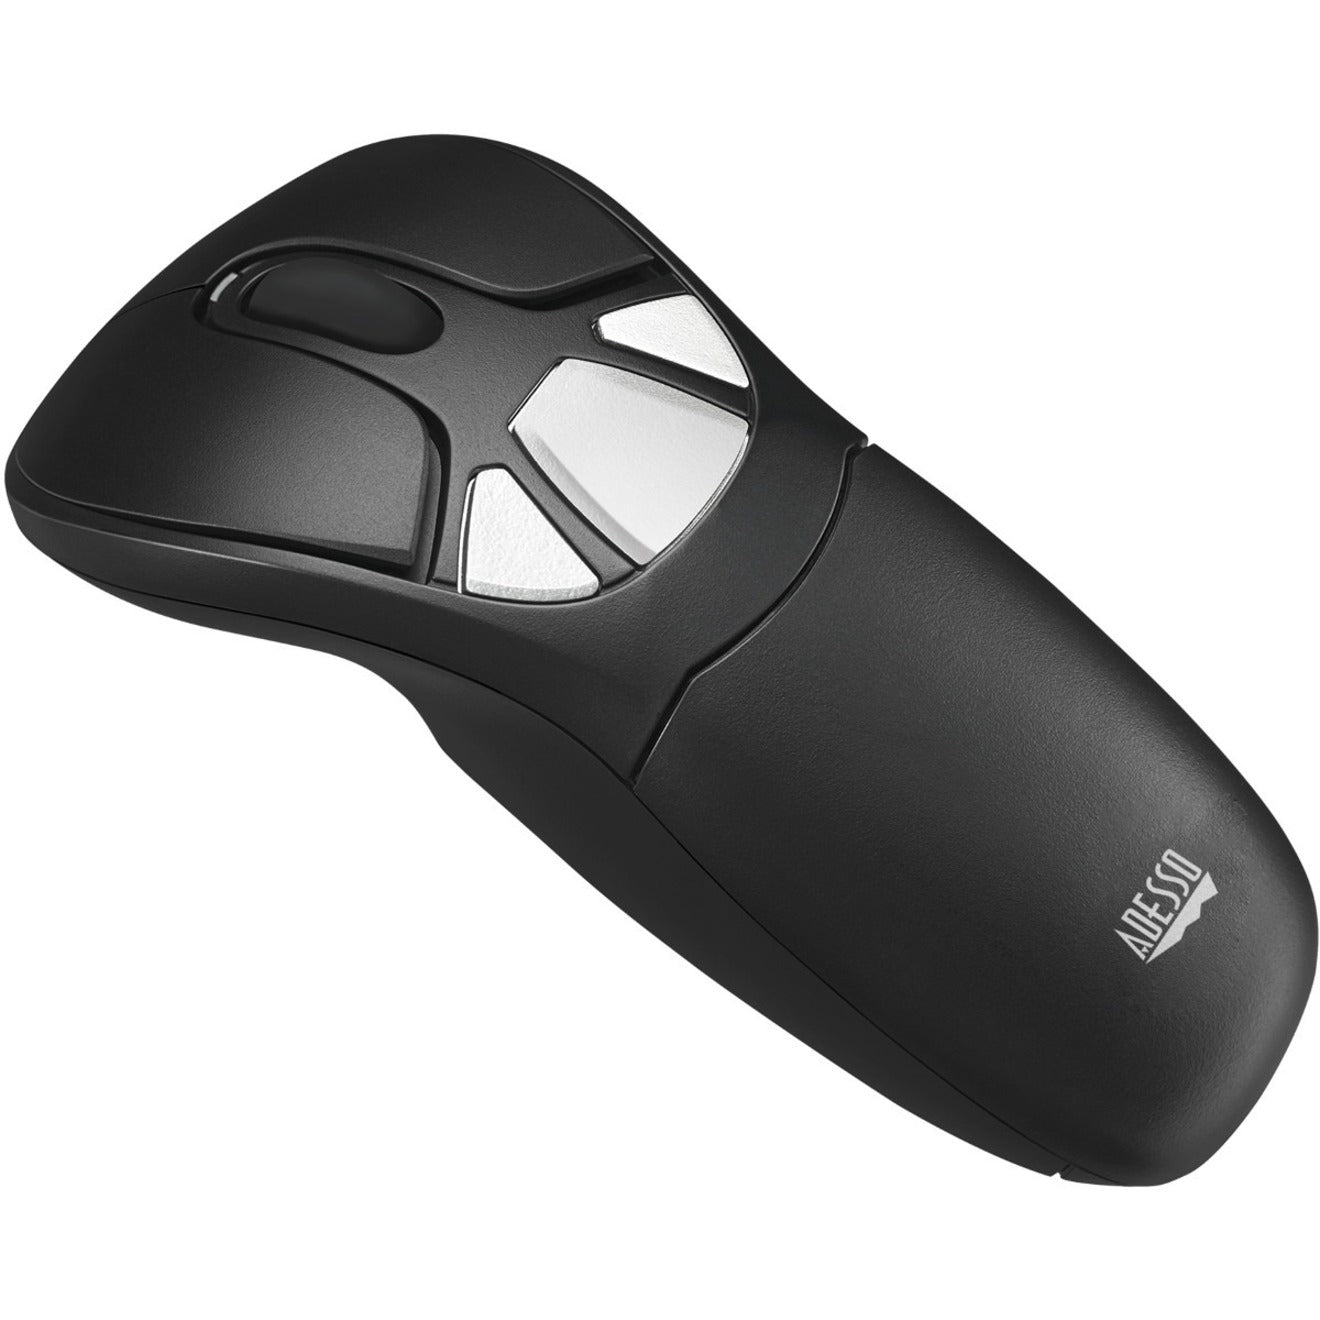 Adesso WKB-5300CB Air Mouse Go Plus With Full Size Keyboard, Wireless Presentation Pointer, 2.4 GHz, Quiet Keys